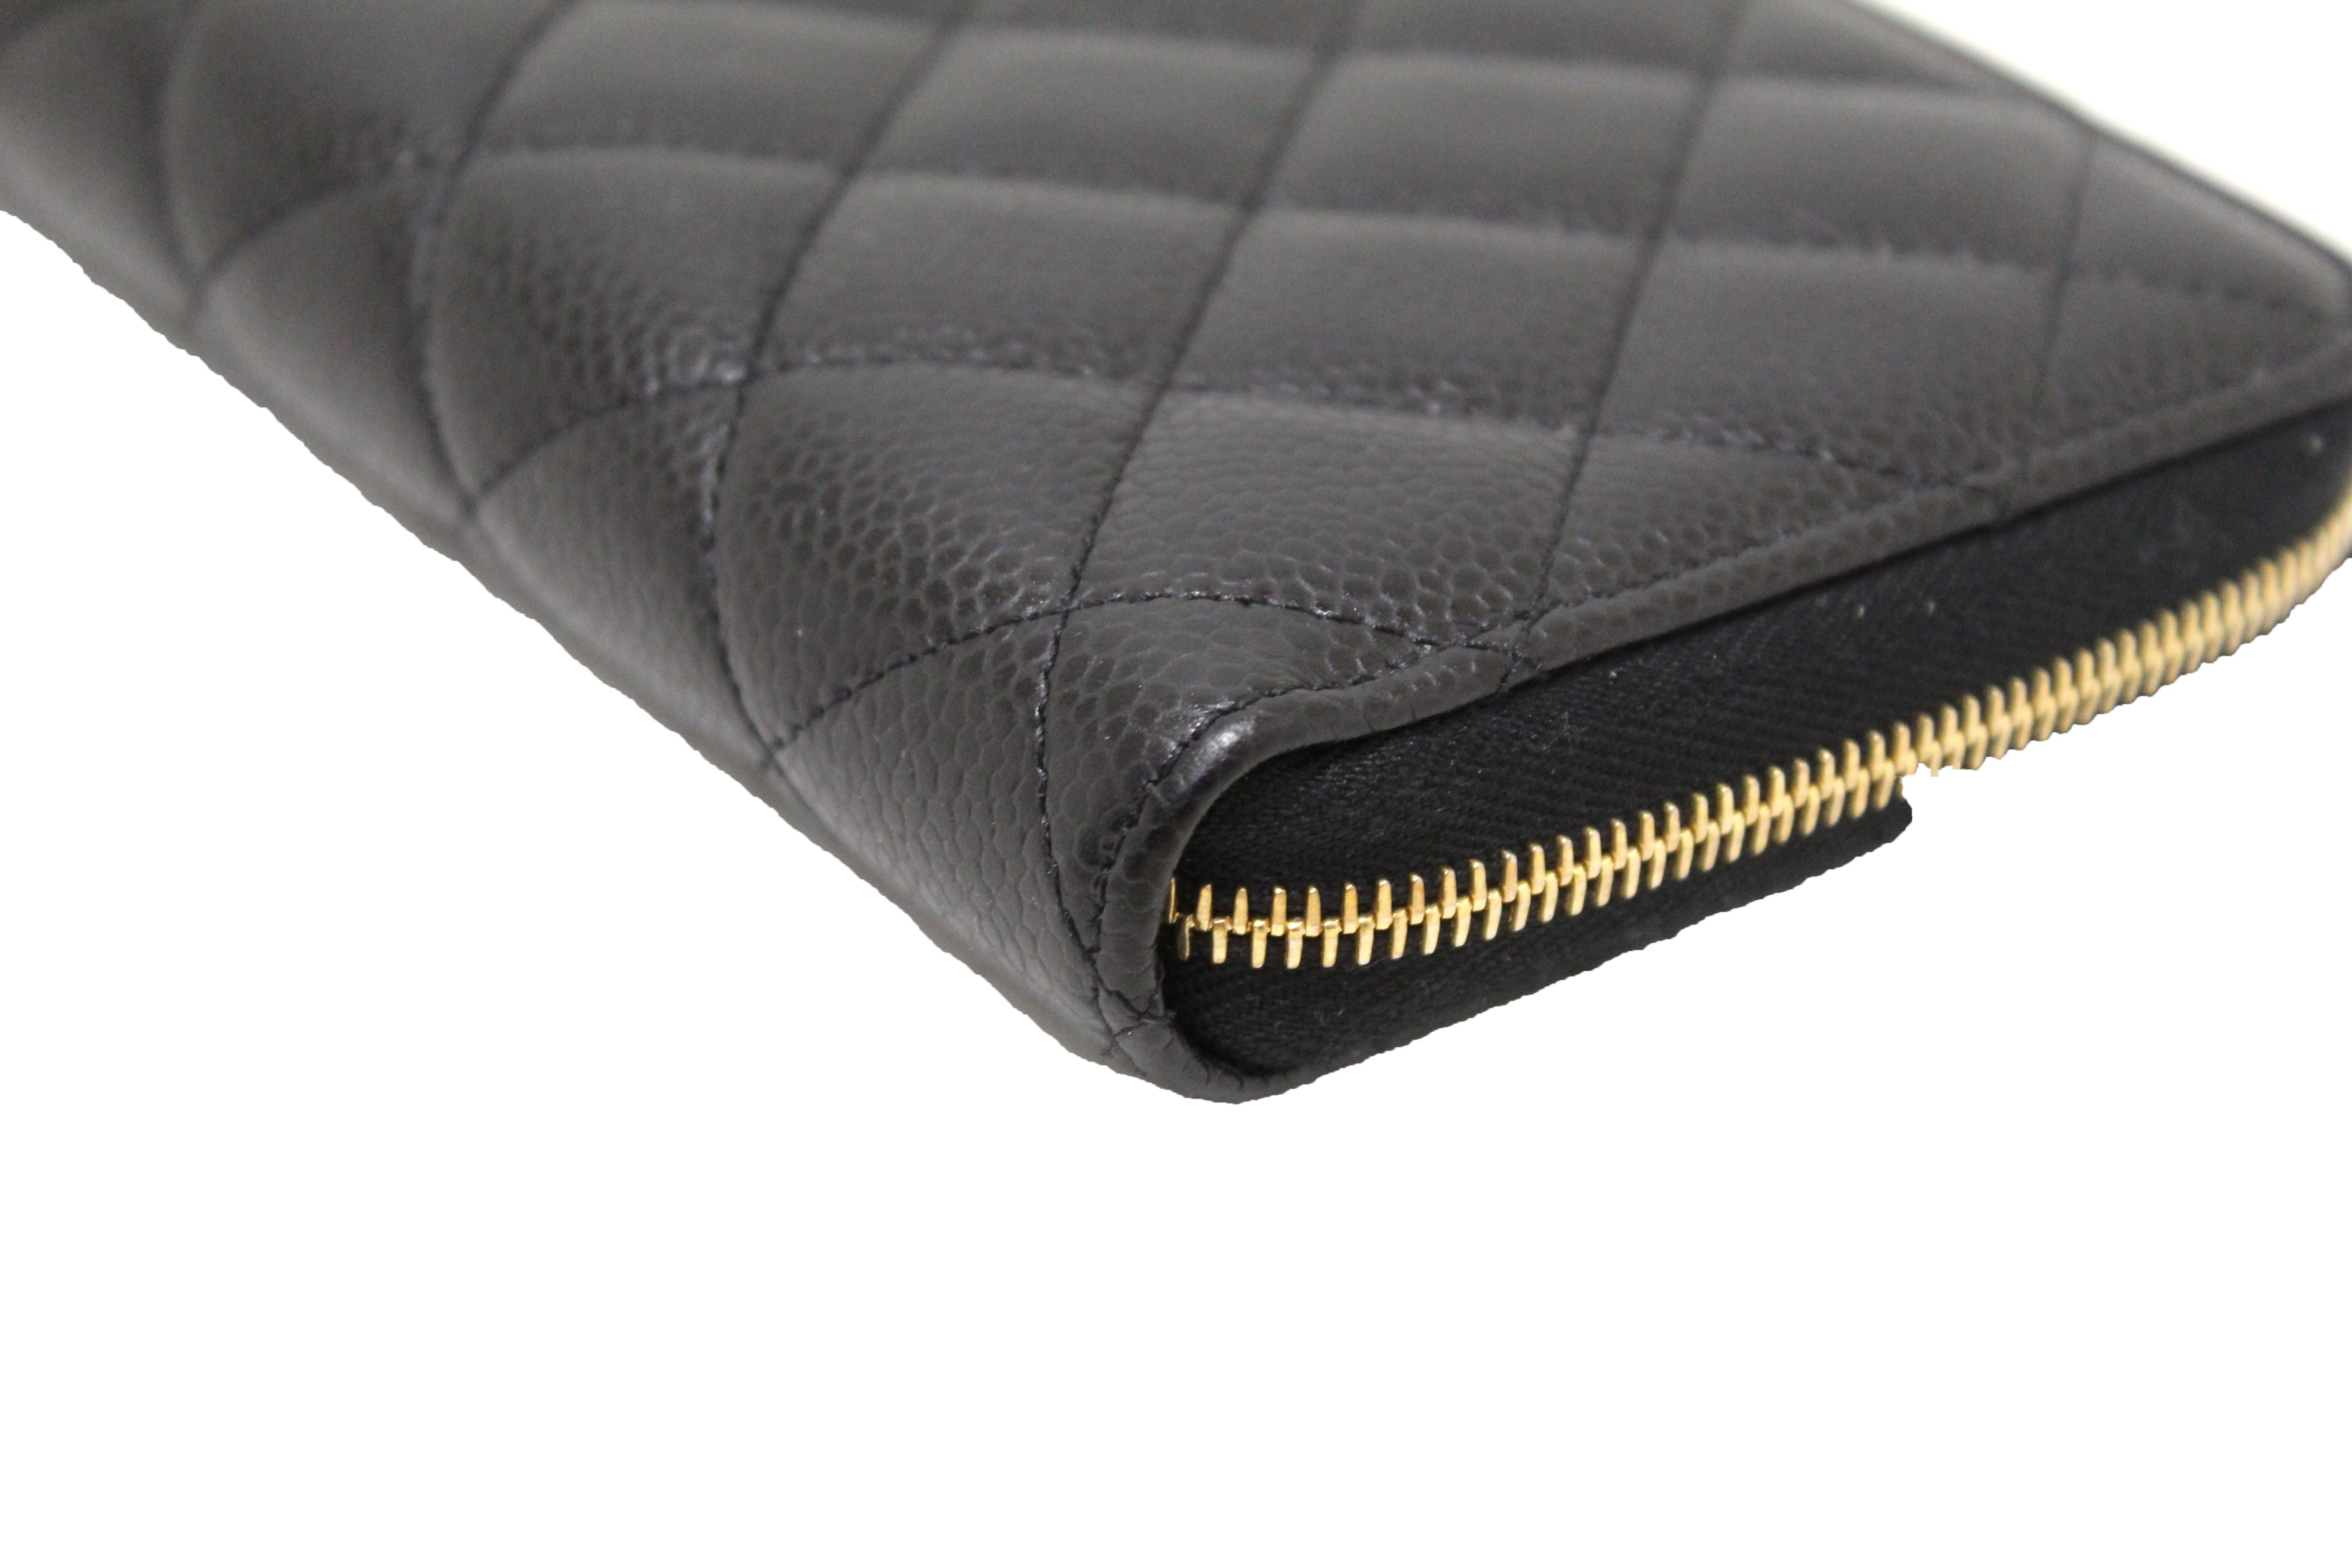 Chanel Classic Black Zippy Grained Leather Purse (Wallets and